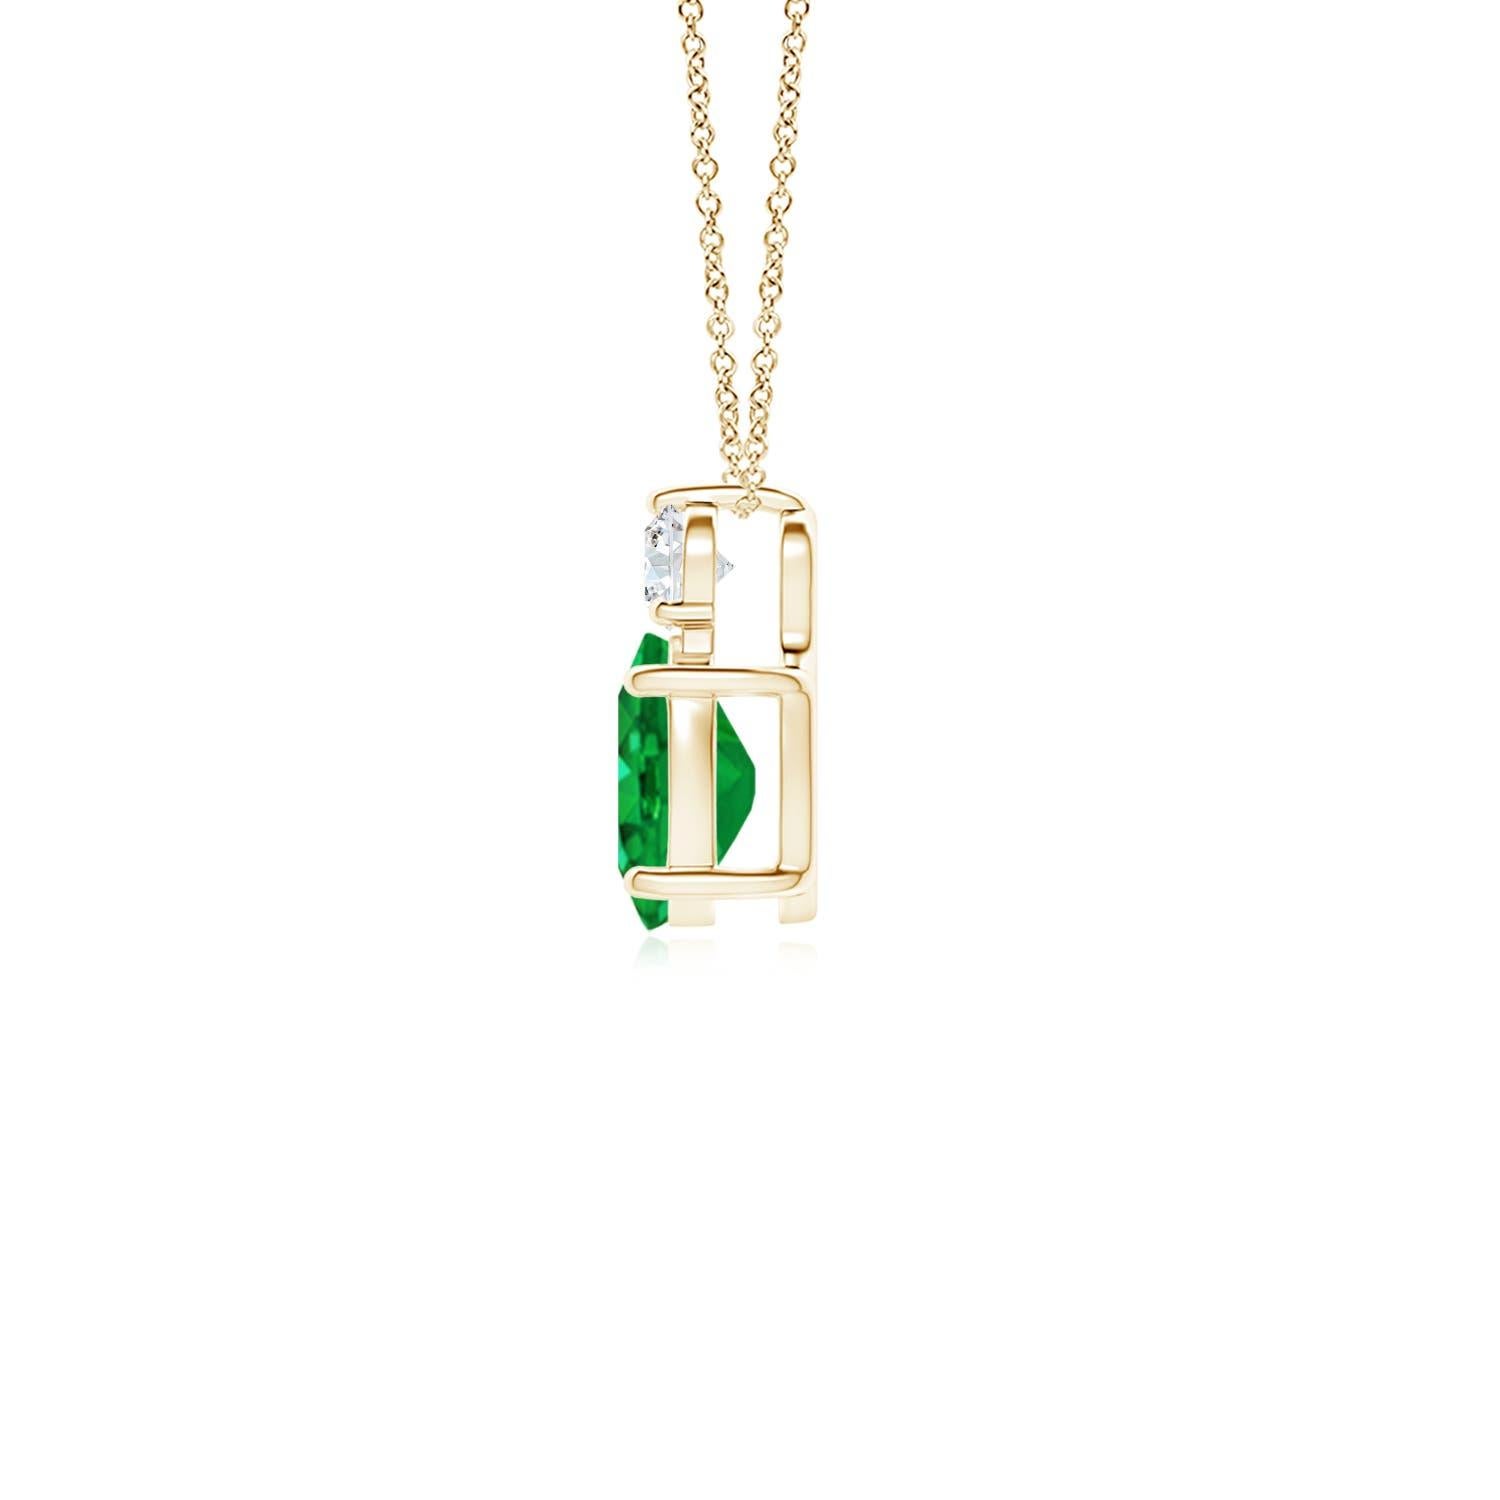 Crafted in 14k yellow gold, this classic solitaire emerald pendant personifies elegance. The rich green oval emerald is topped by a sparkling diamond for added allure. The intricate scroll work on the sides enhances this prong set emerald pendant's